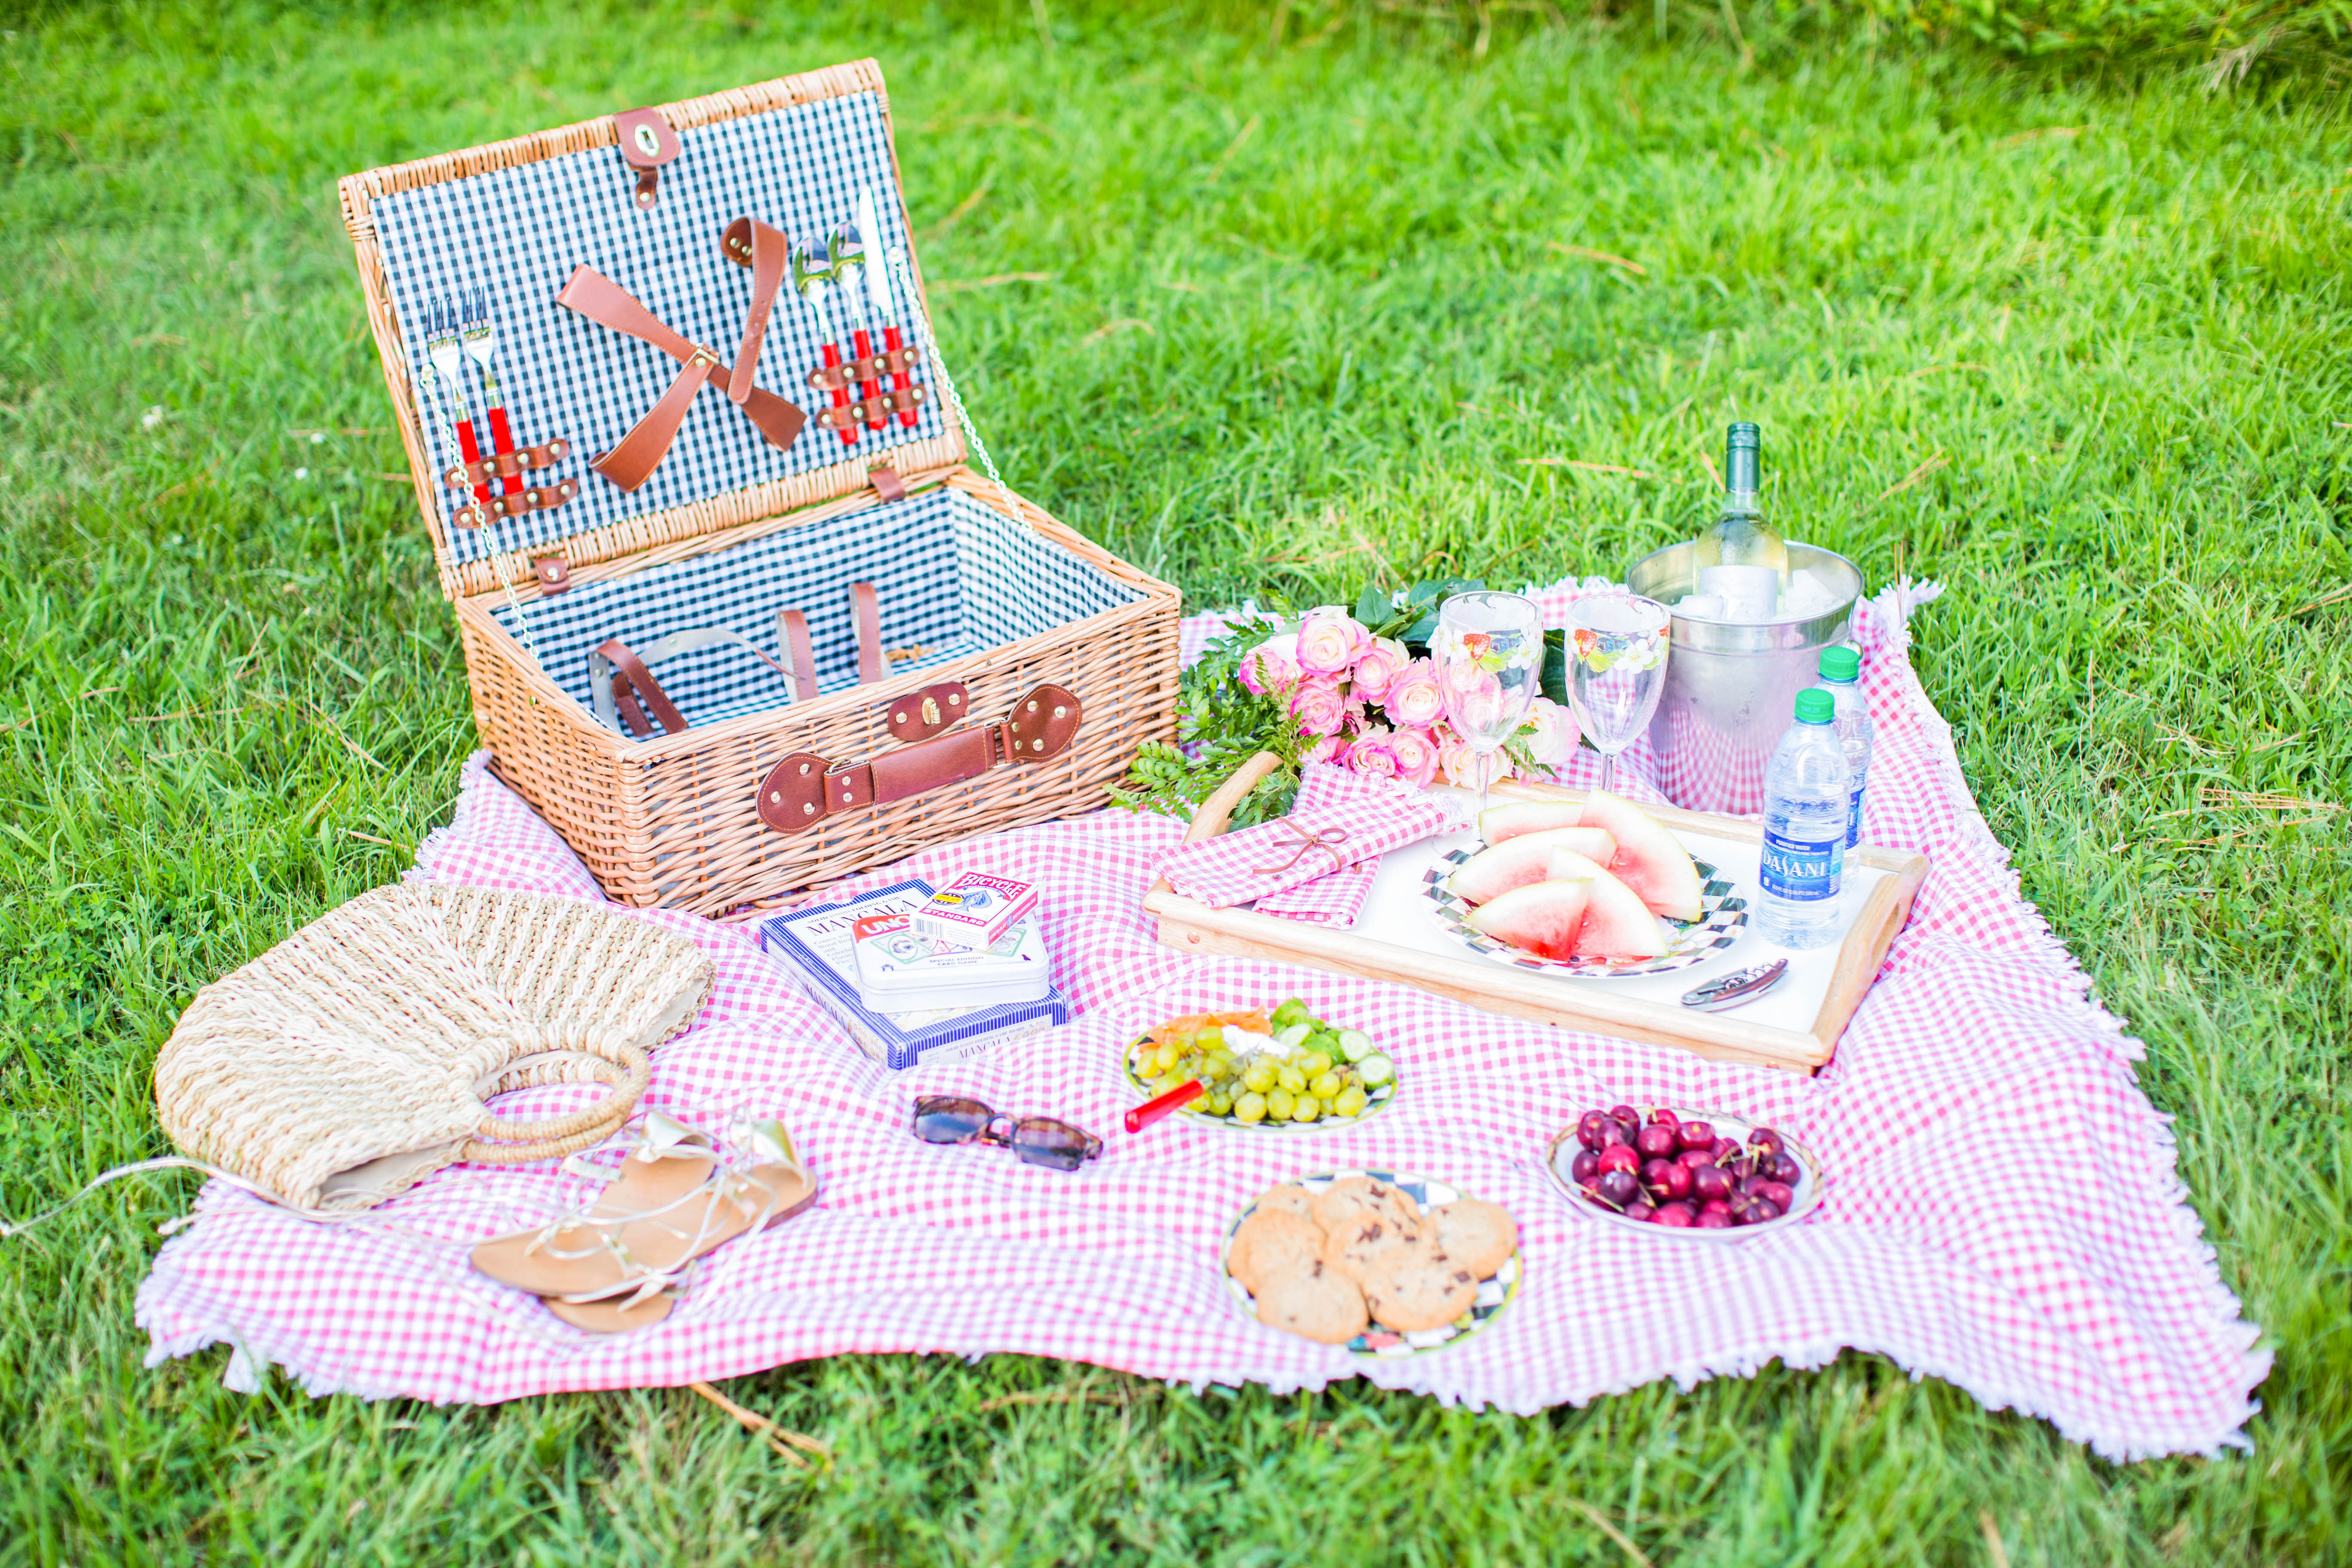 How to Have the Perfect Summer Picnic by NC blogger Coffee Beans and Bobby Pins